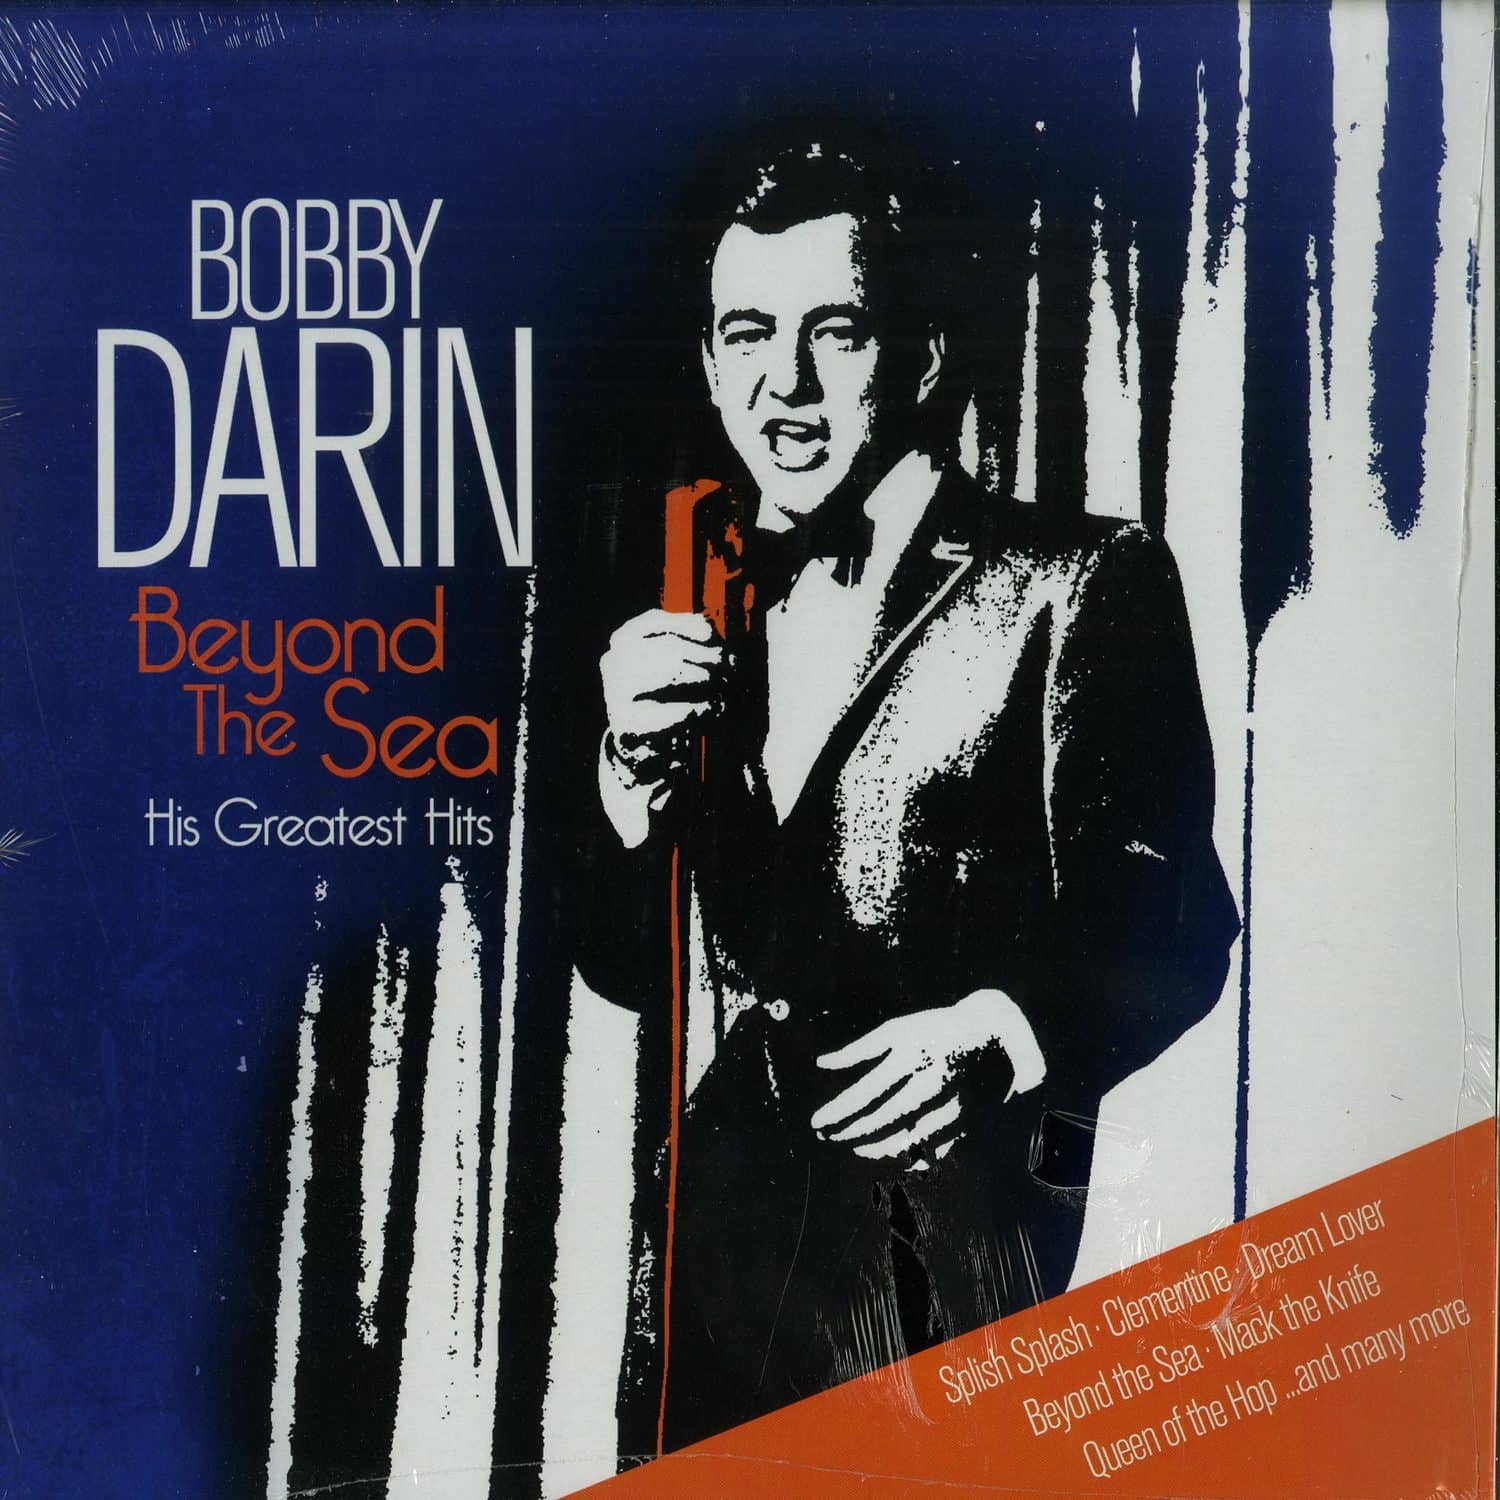 Bobby Darin - BEYOND THE SEA - HIS GREATEST HITS 